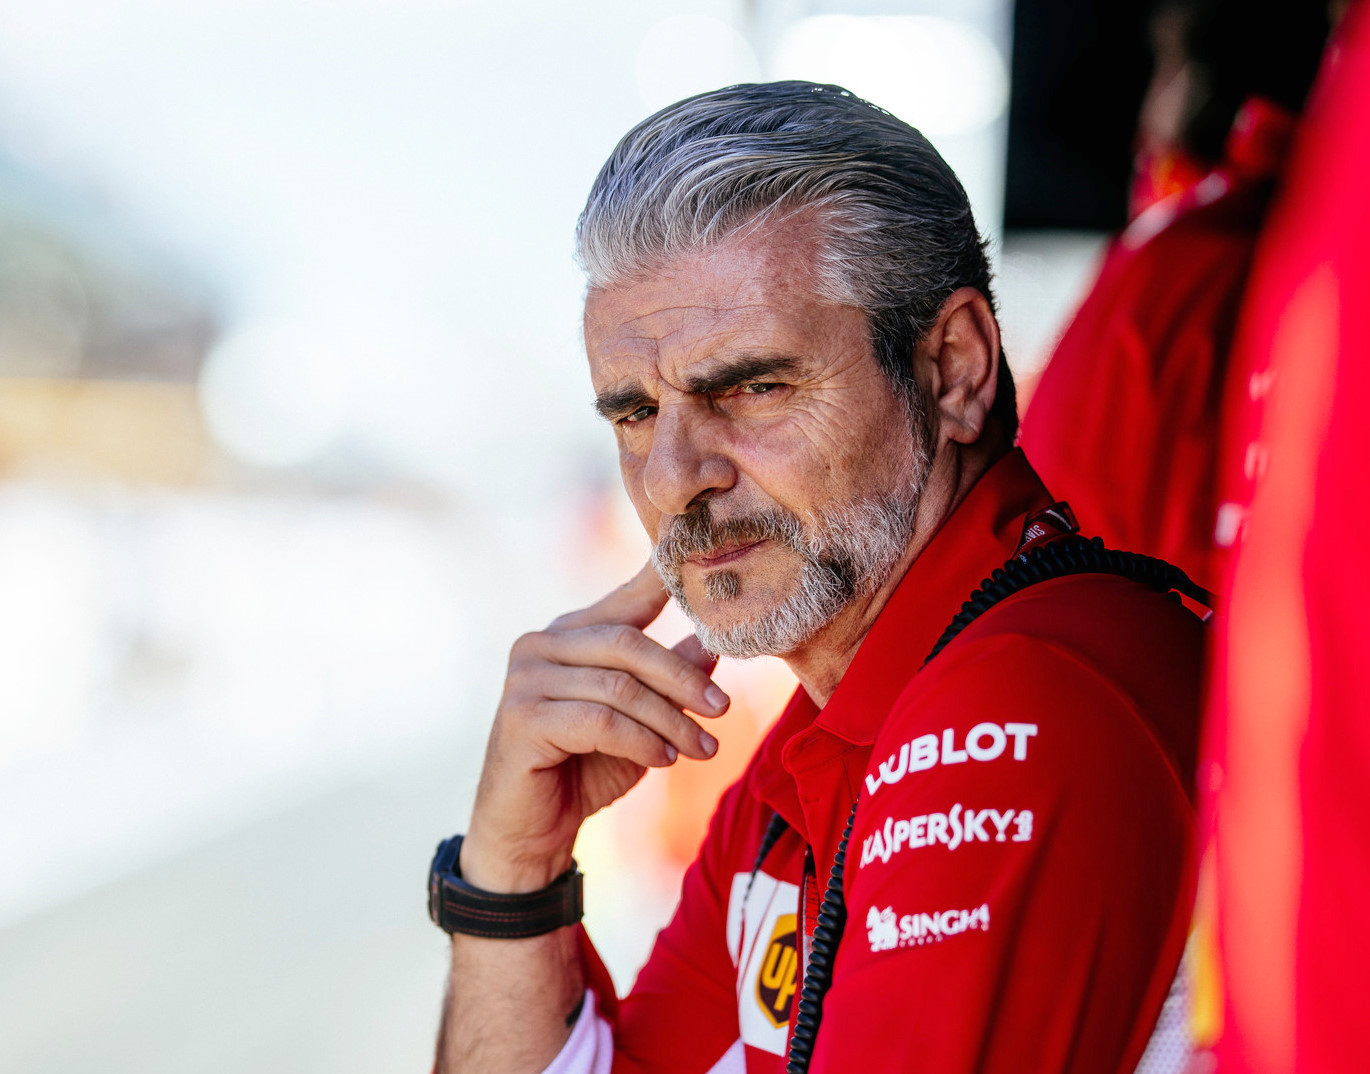 Arrivabene and the whole Ferrari team have blown it